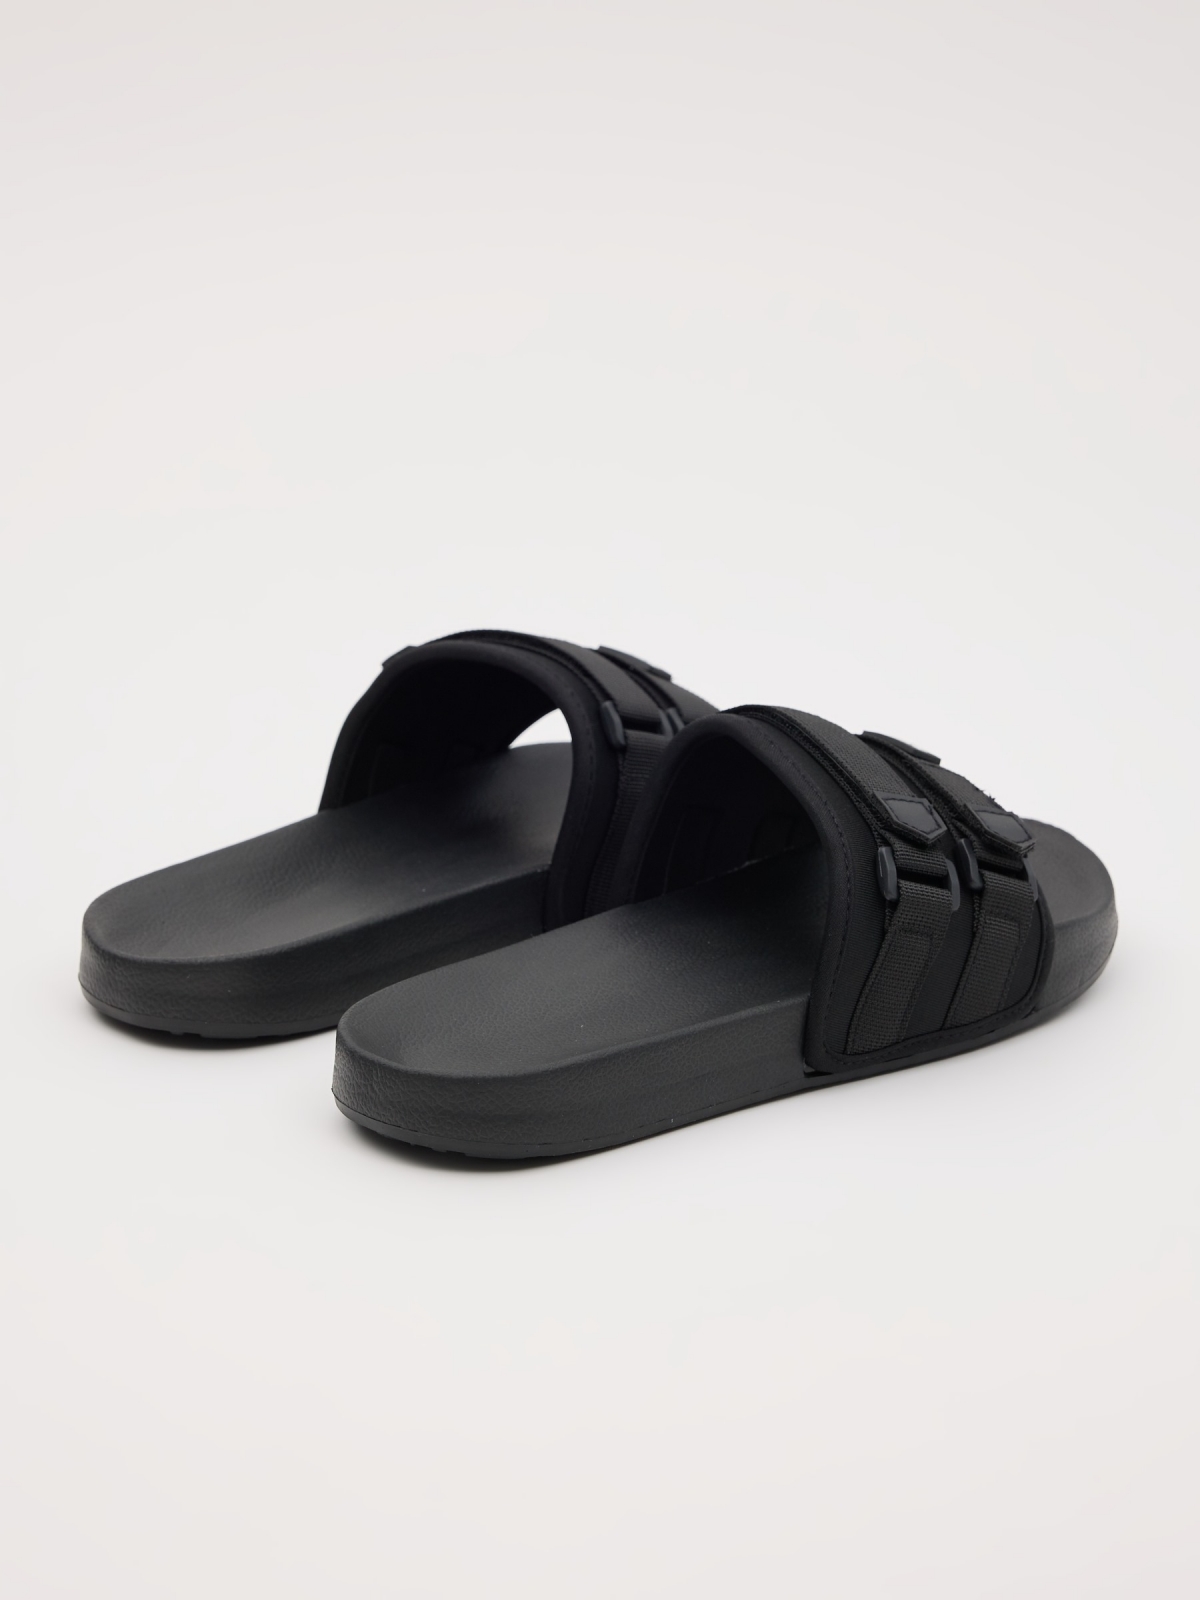 Flip flops with buckle fasteners black 45º back view